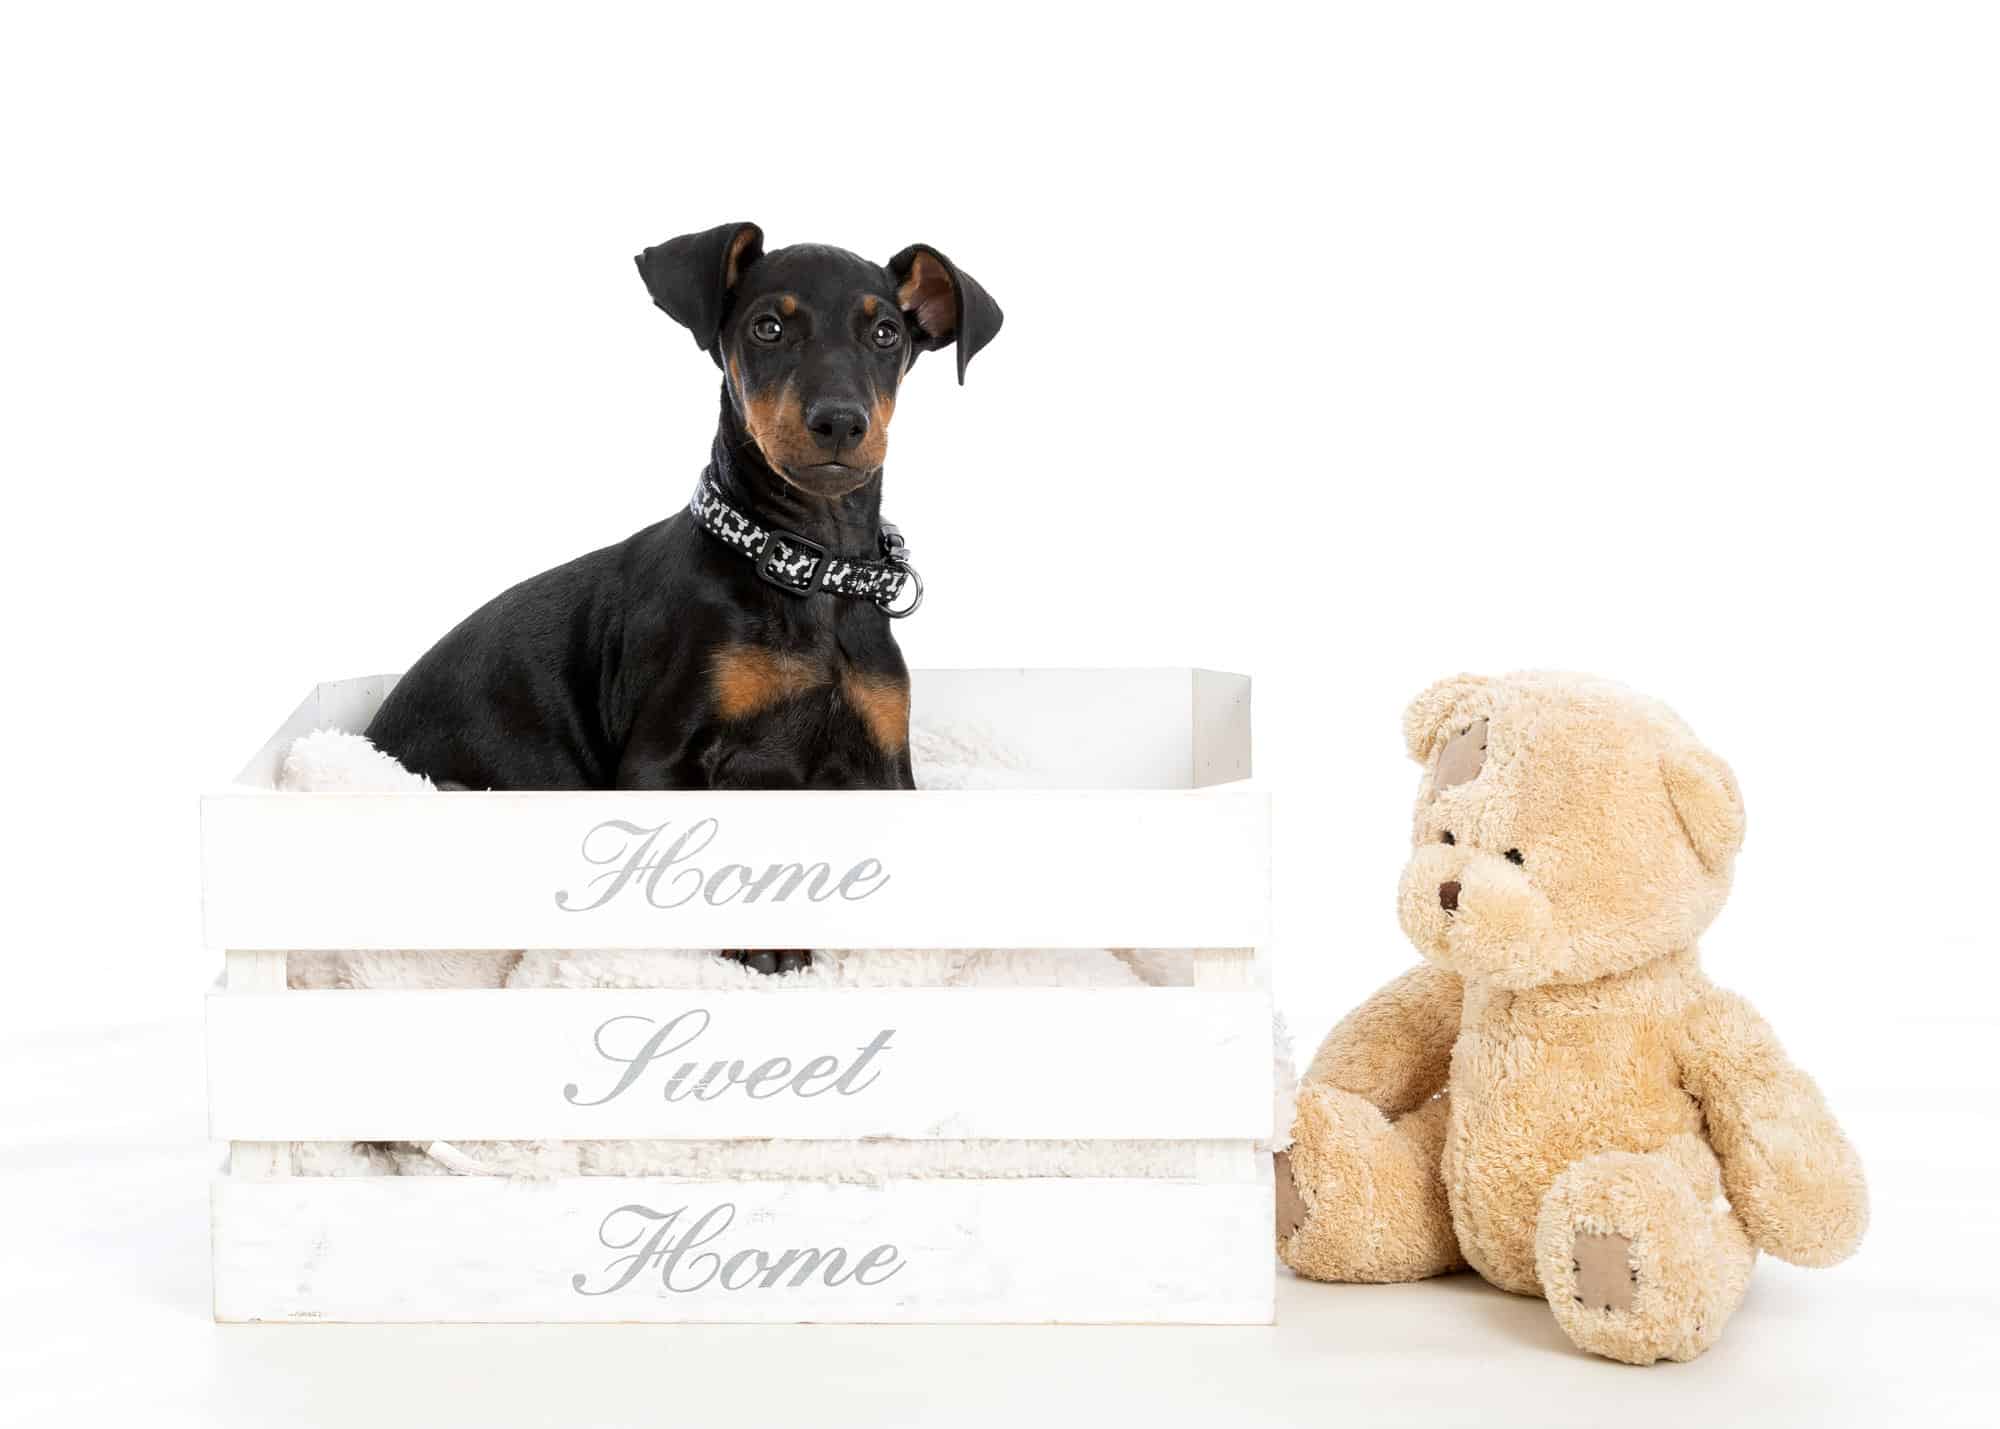 Dachshund sat in a white crate with a teddybear sat beside